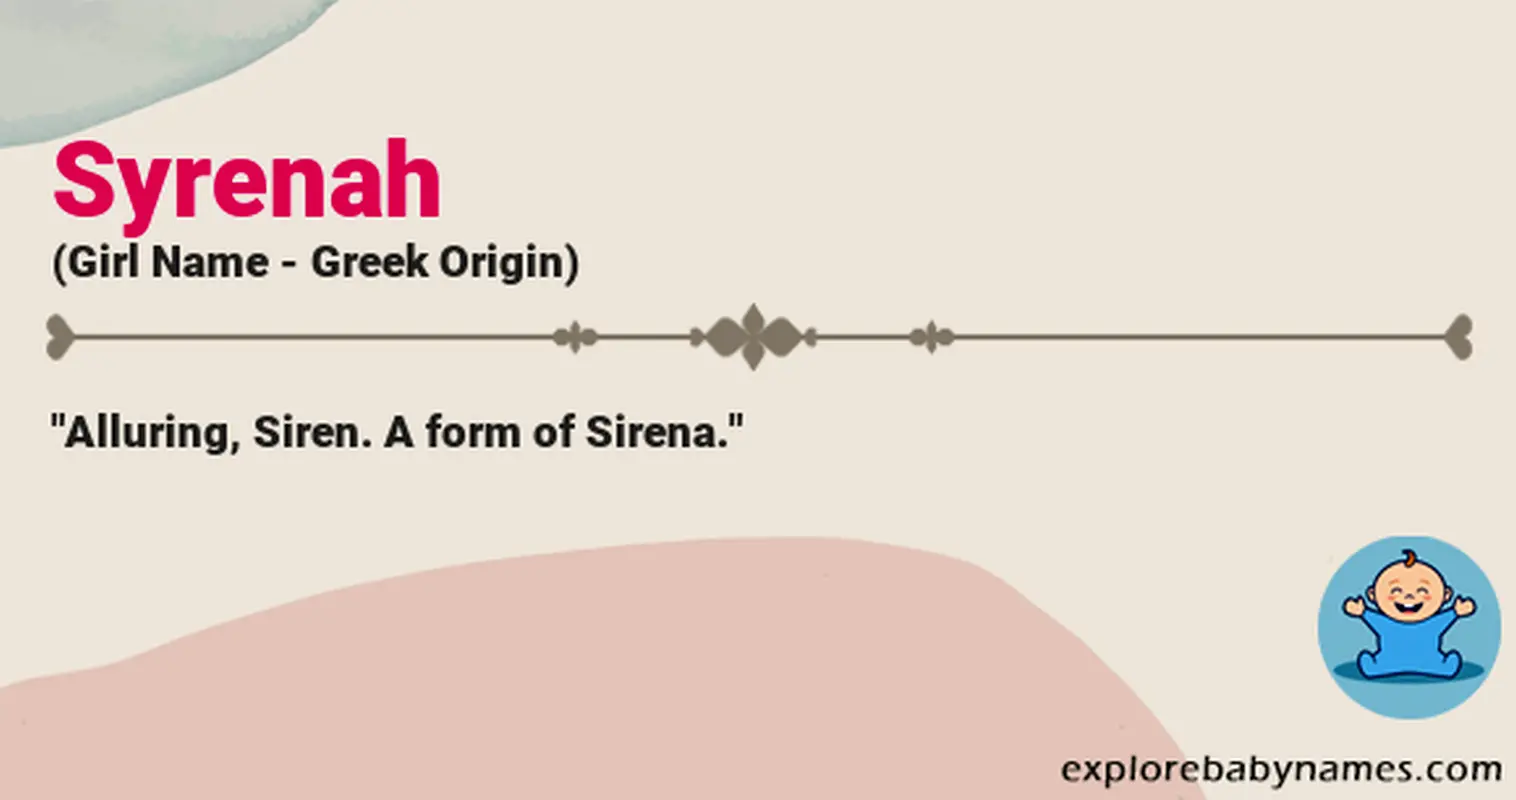 Meaning of Syrenah